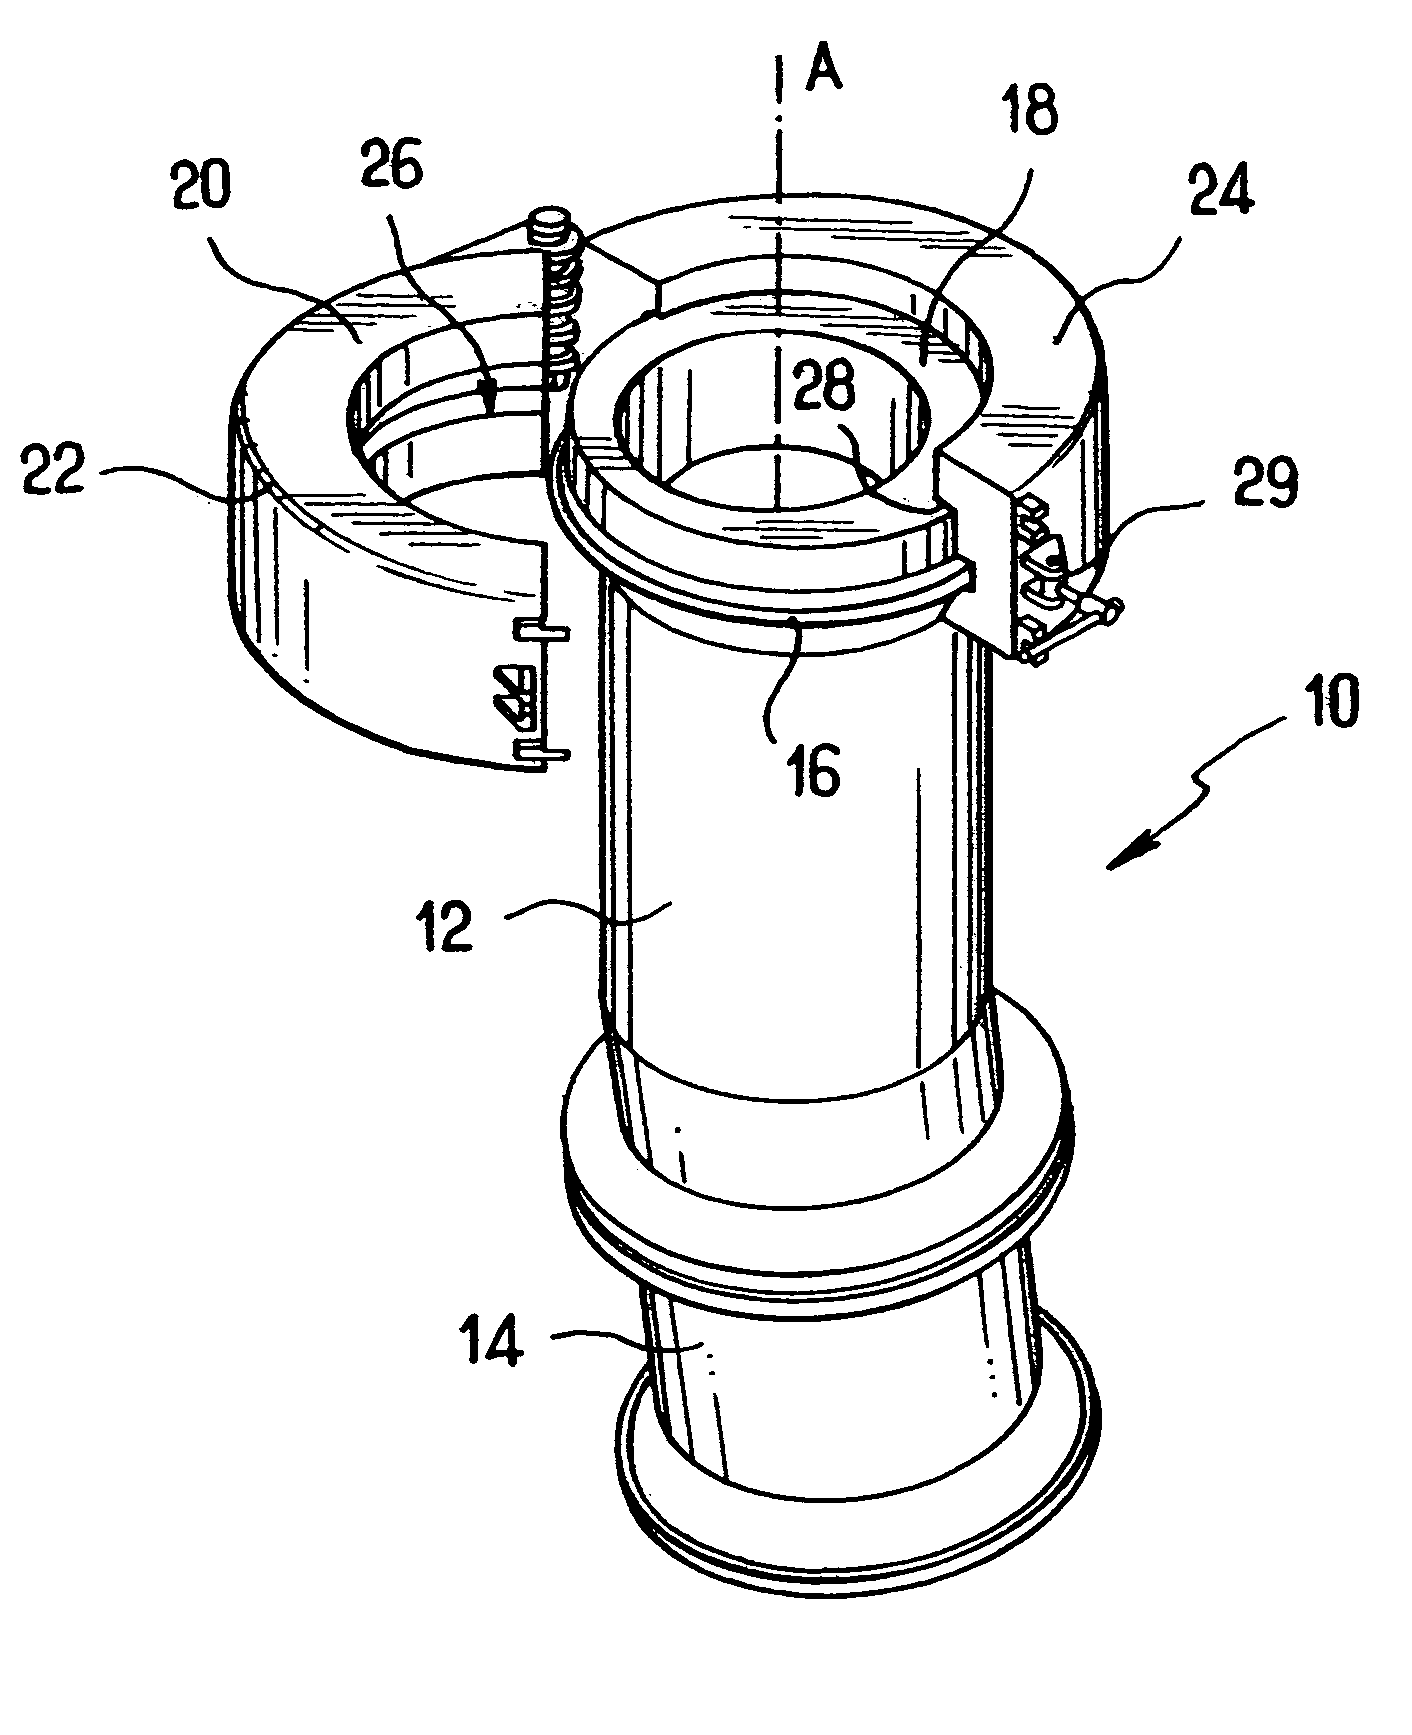 Guide tube for a flexible pipe for transporting hydrocarbons